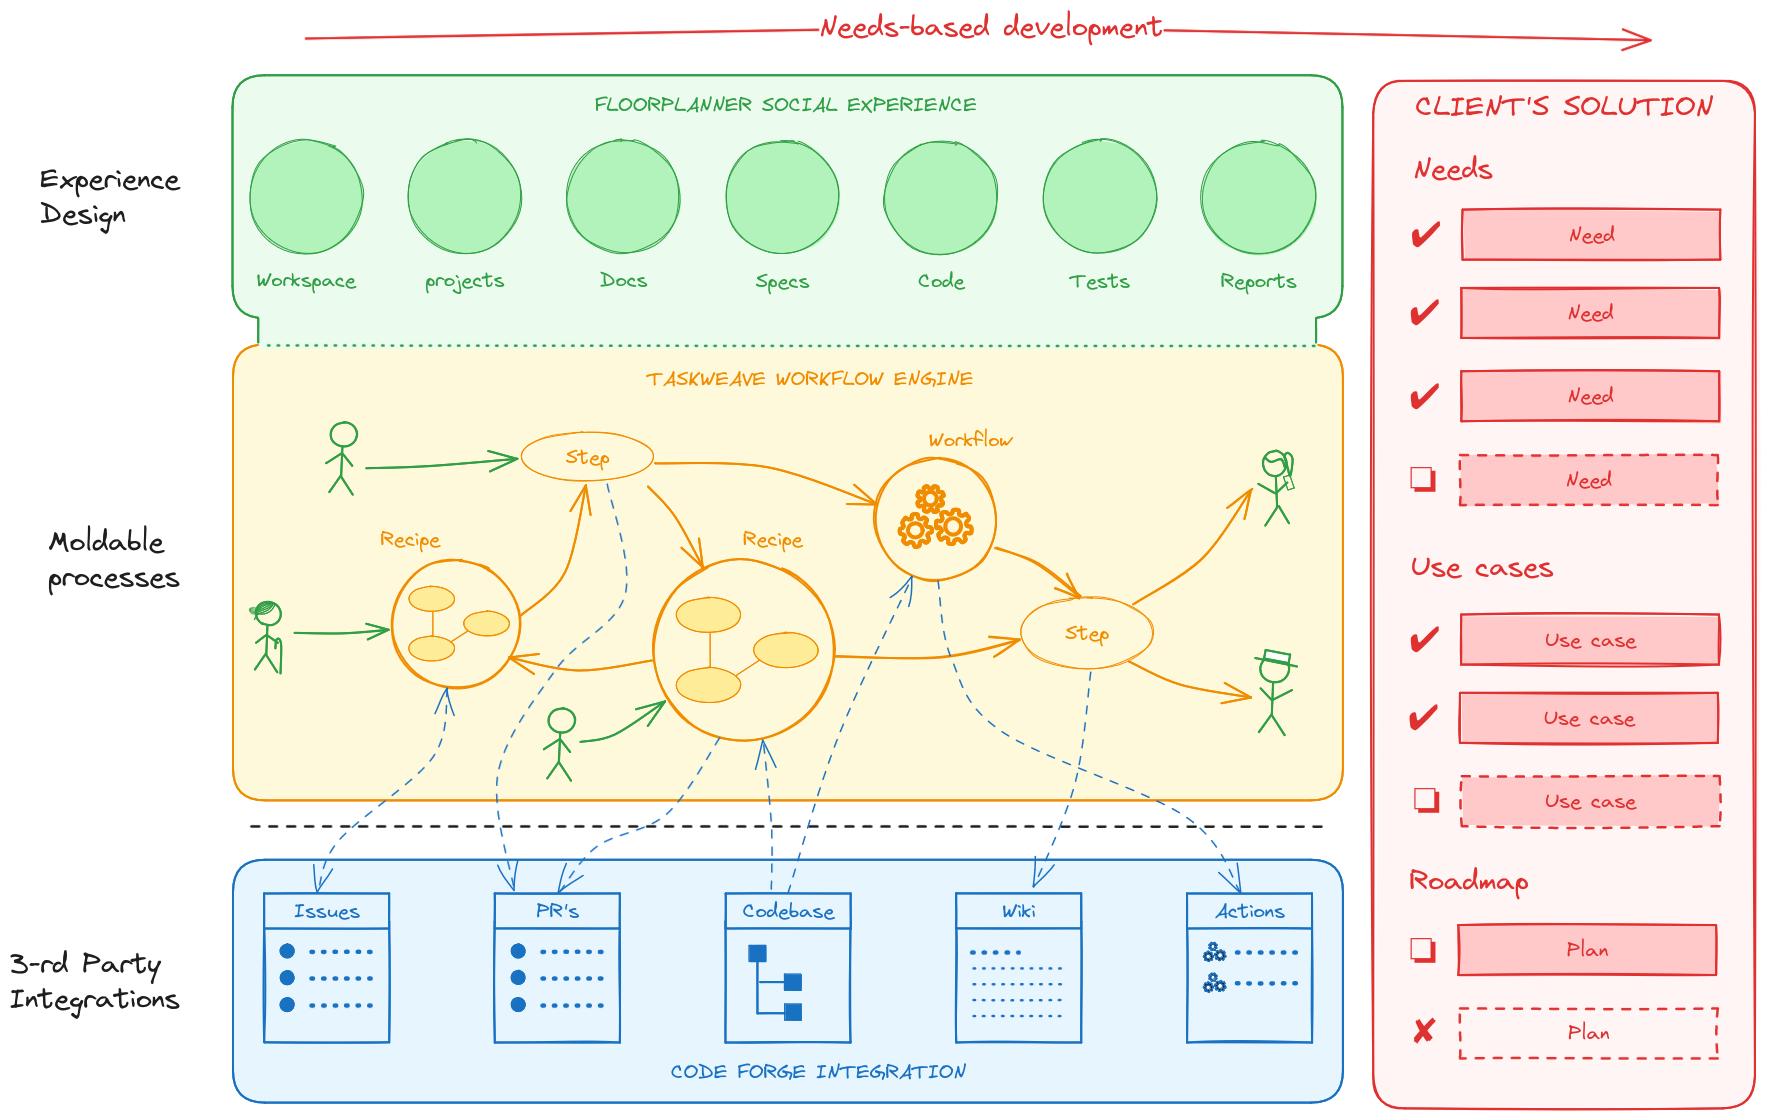 Diagram that shows a conceptual overview of the Solidground tool suite. On the right are three blocks.
    From top to bottom they are Floorplanner social experience for experience design, Taskweave workflow engine
    to support moldable processes, and separated by a dotted line an example of a system integration with a
    code forge. On the right side a block depicts the Solution containing checklists for Needs, Use cases
    and Roadmap plans